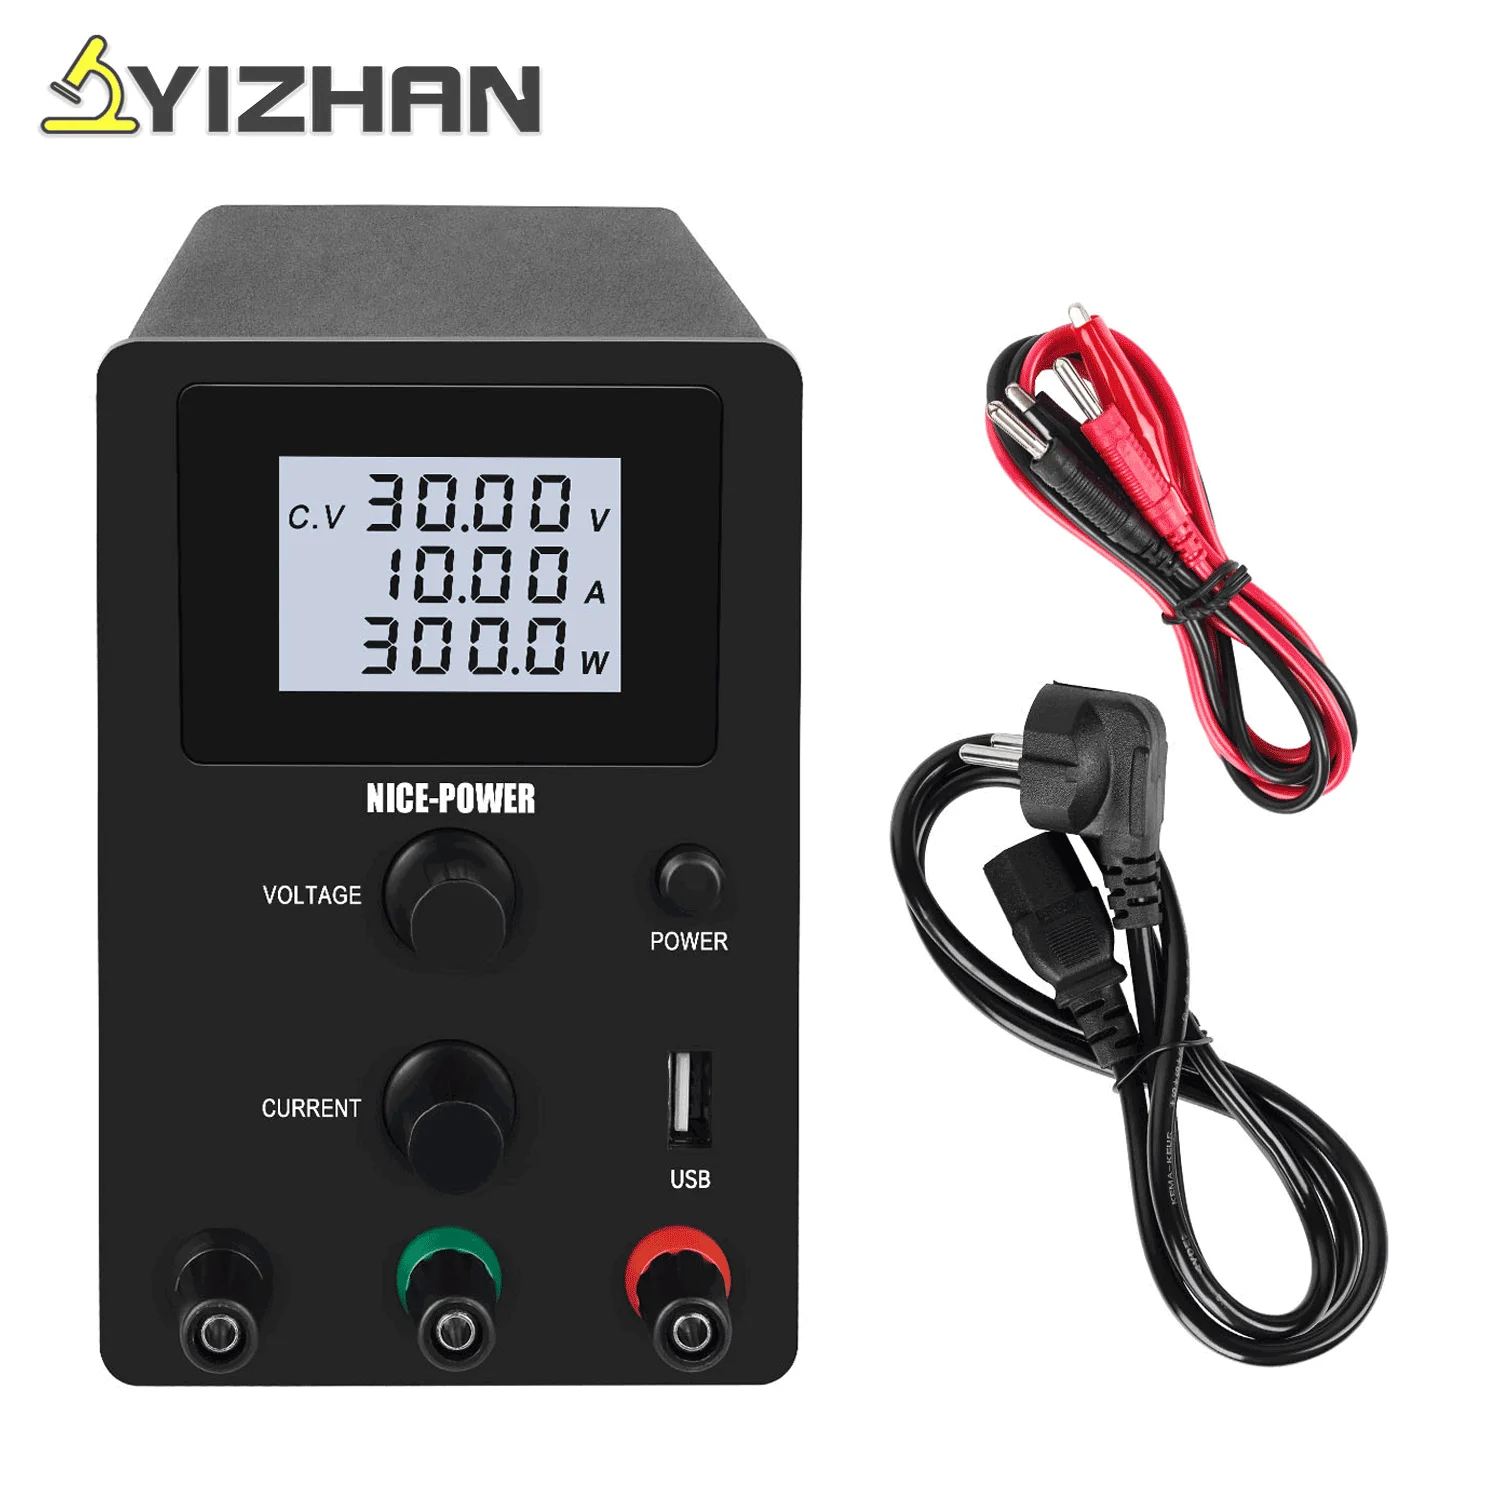 

NICE-POWER 30V 10A DC Power Supply Variable 60V 5A Adjustable Switching Regulated Source High Precision 4-Digits LCD Display USB